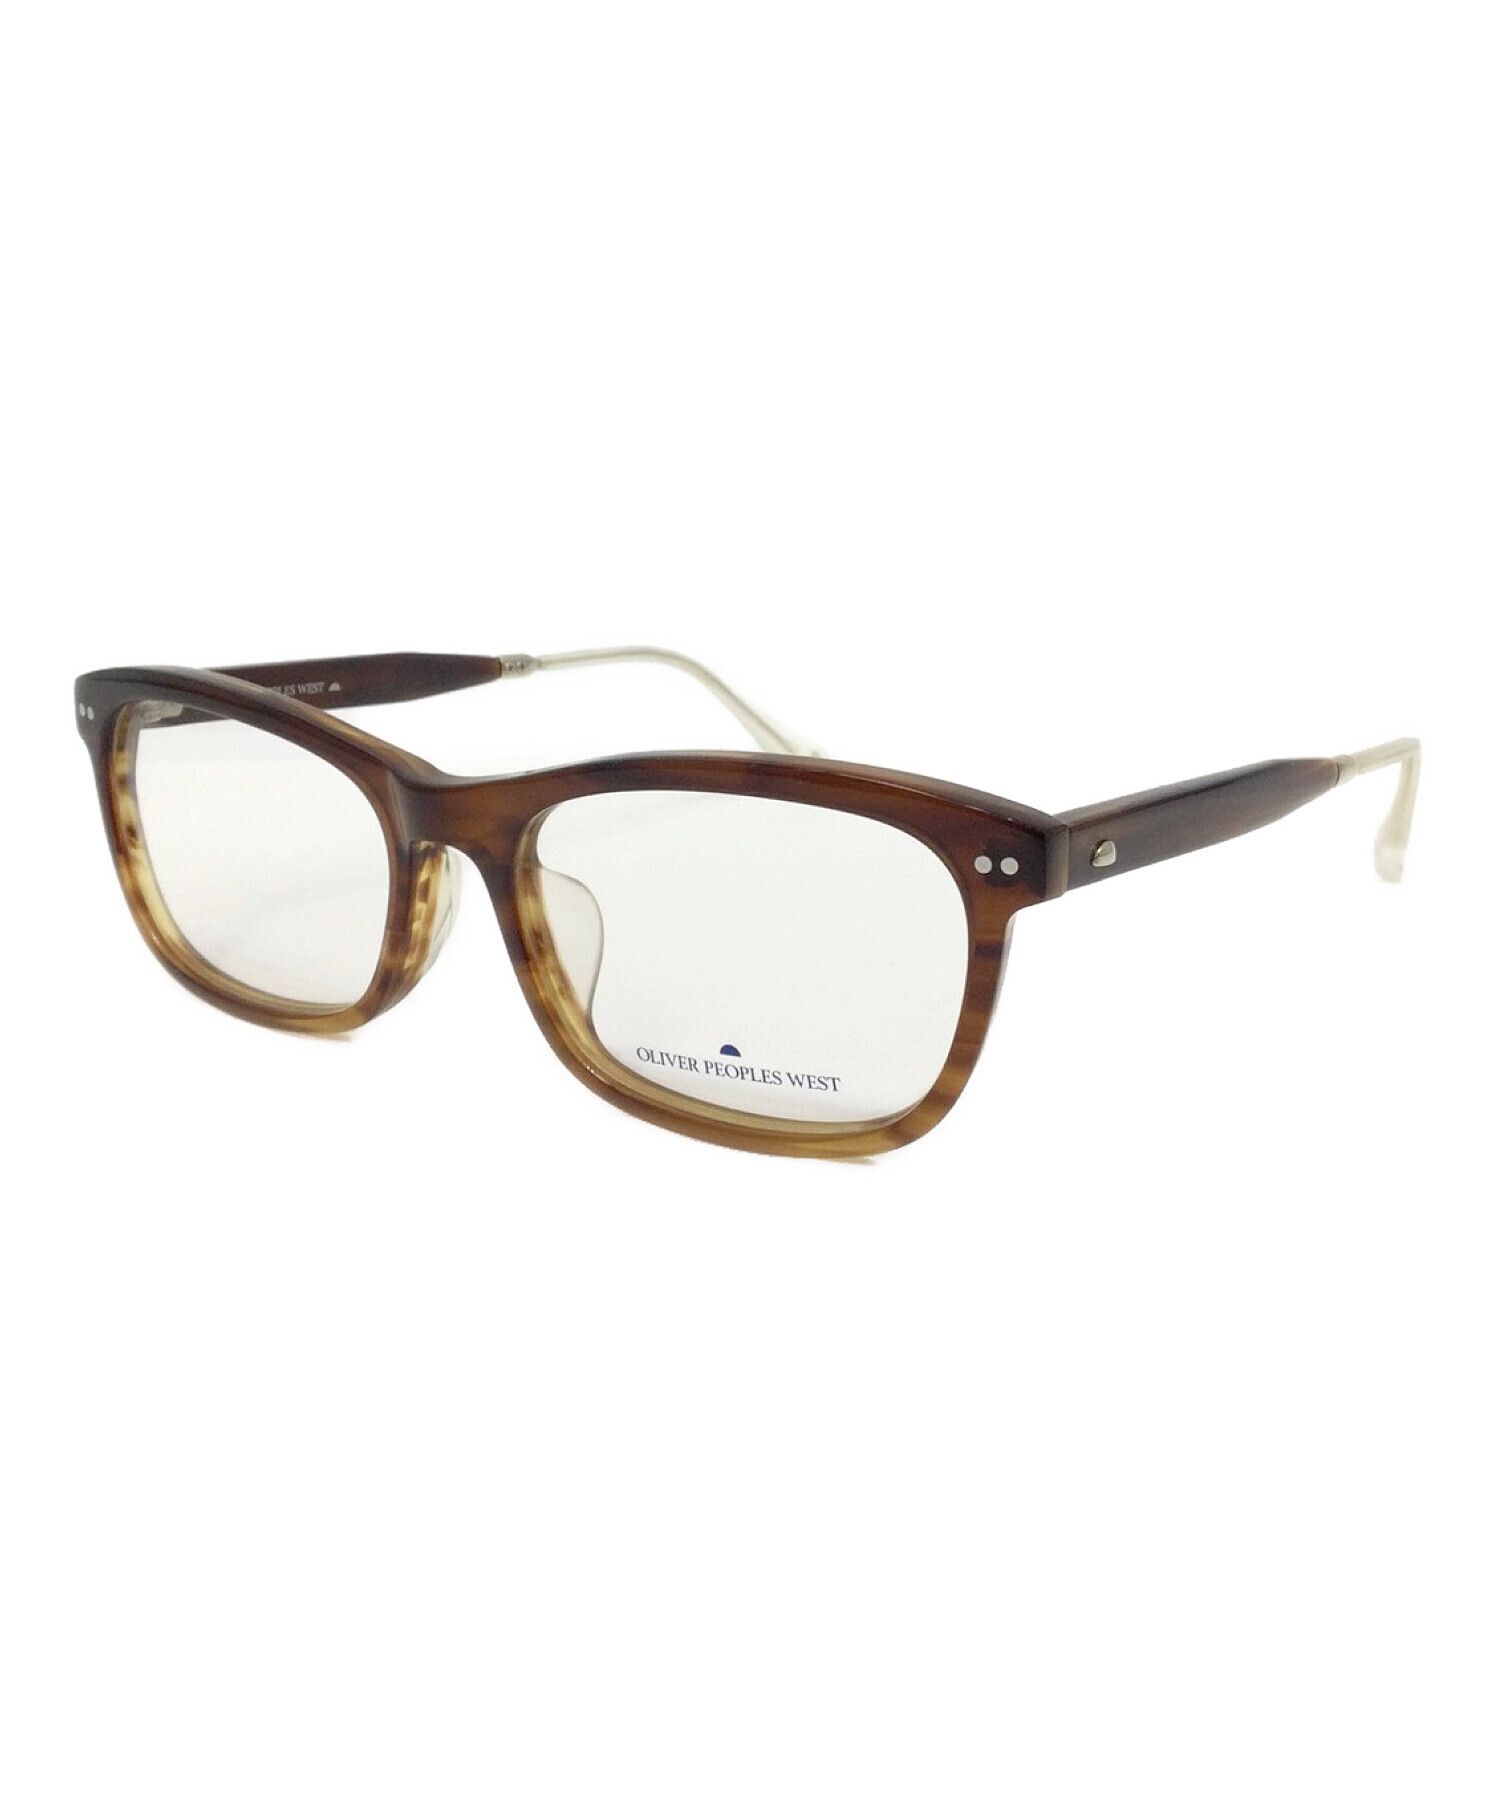 OLIVER PEOPLES WEST 眼鏡